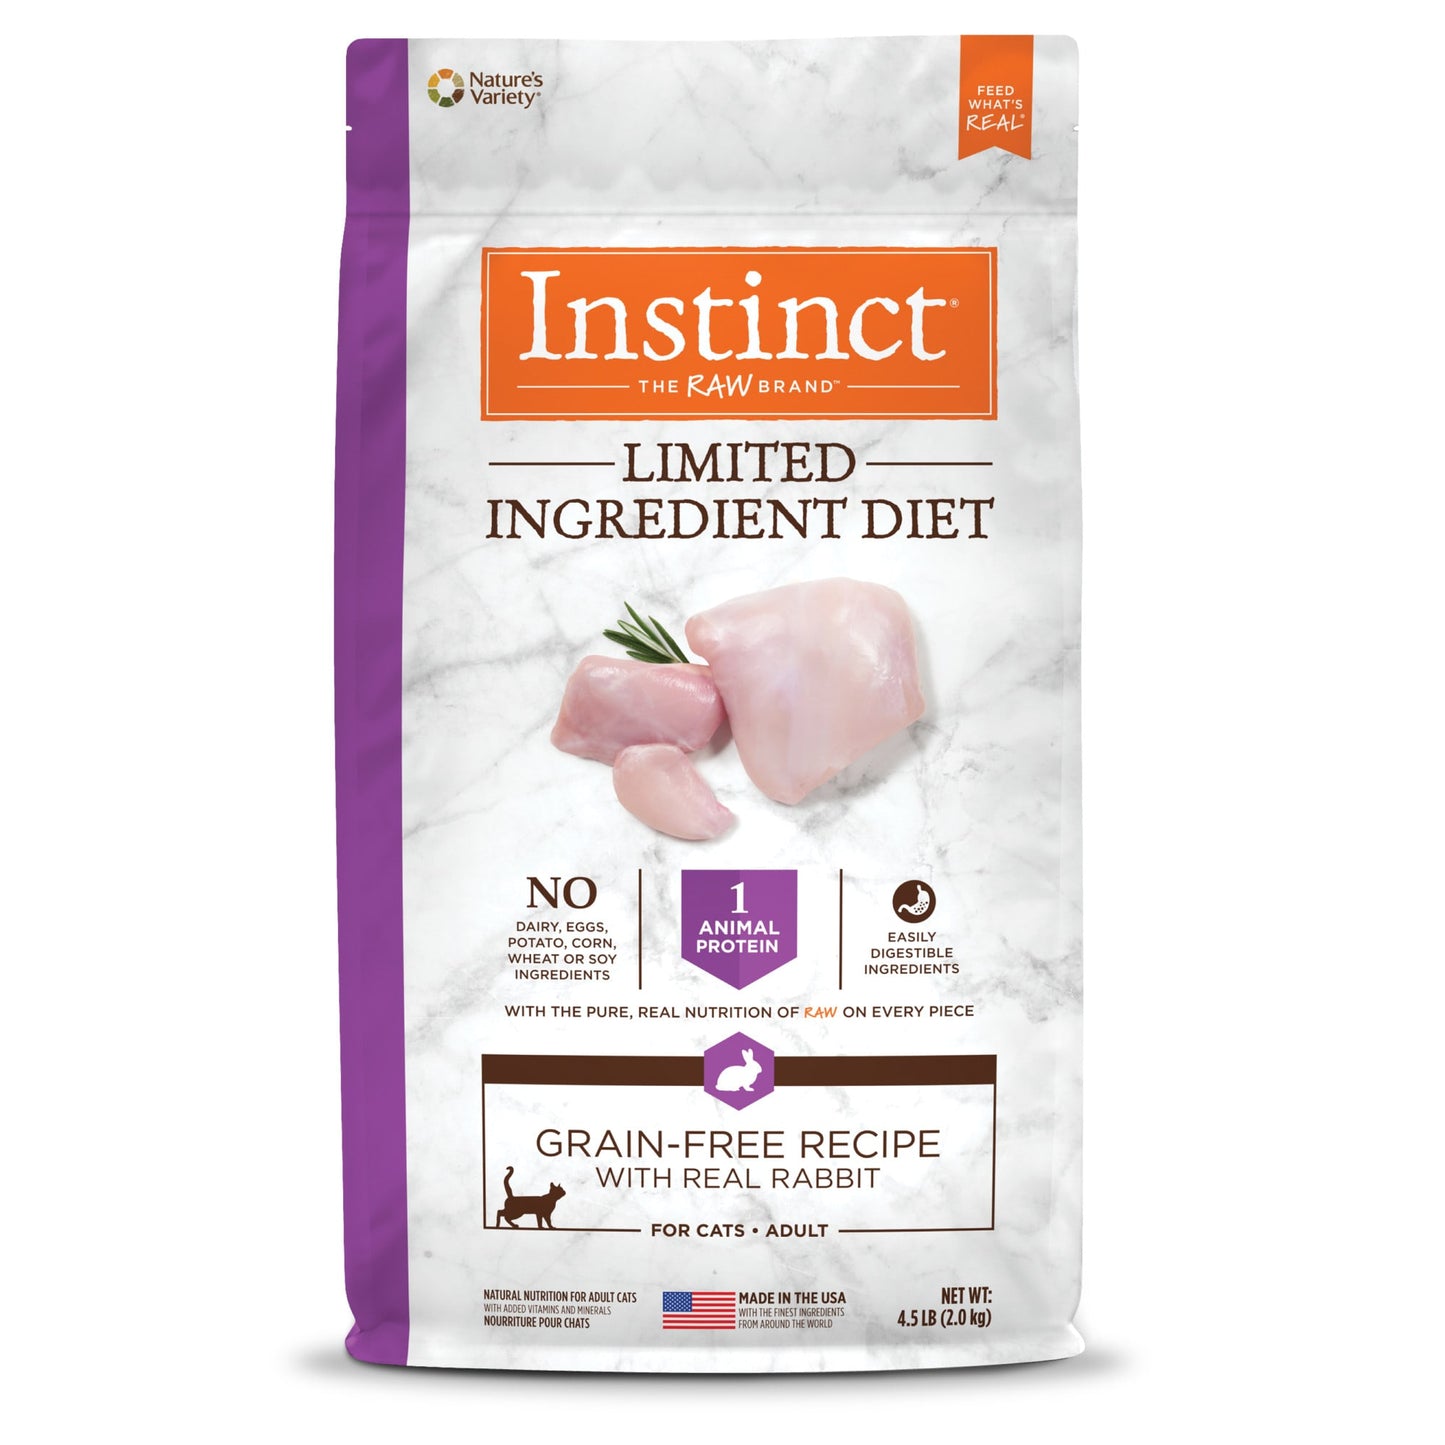 Instinct Limited Ingredient Diet Grain-Free Recipe with Real Rabbit Natural Dry Cat Food by Nature s Variety  4.5 lb. Bag